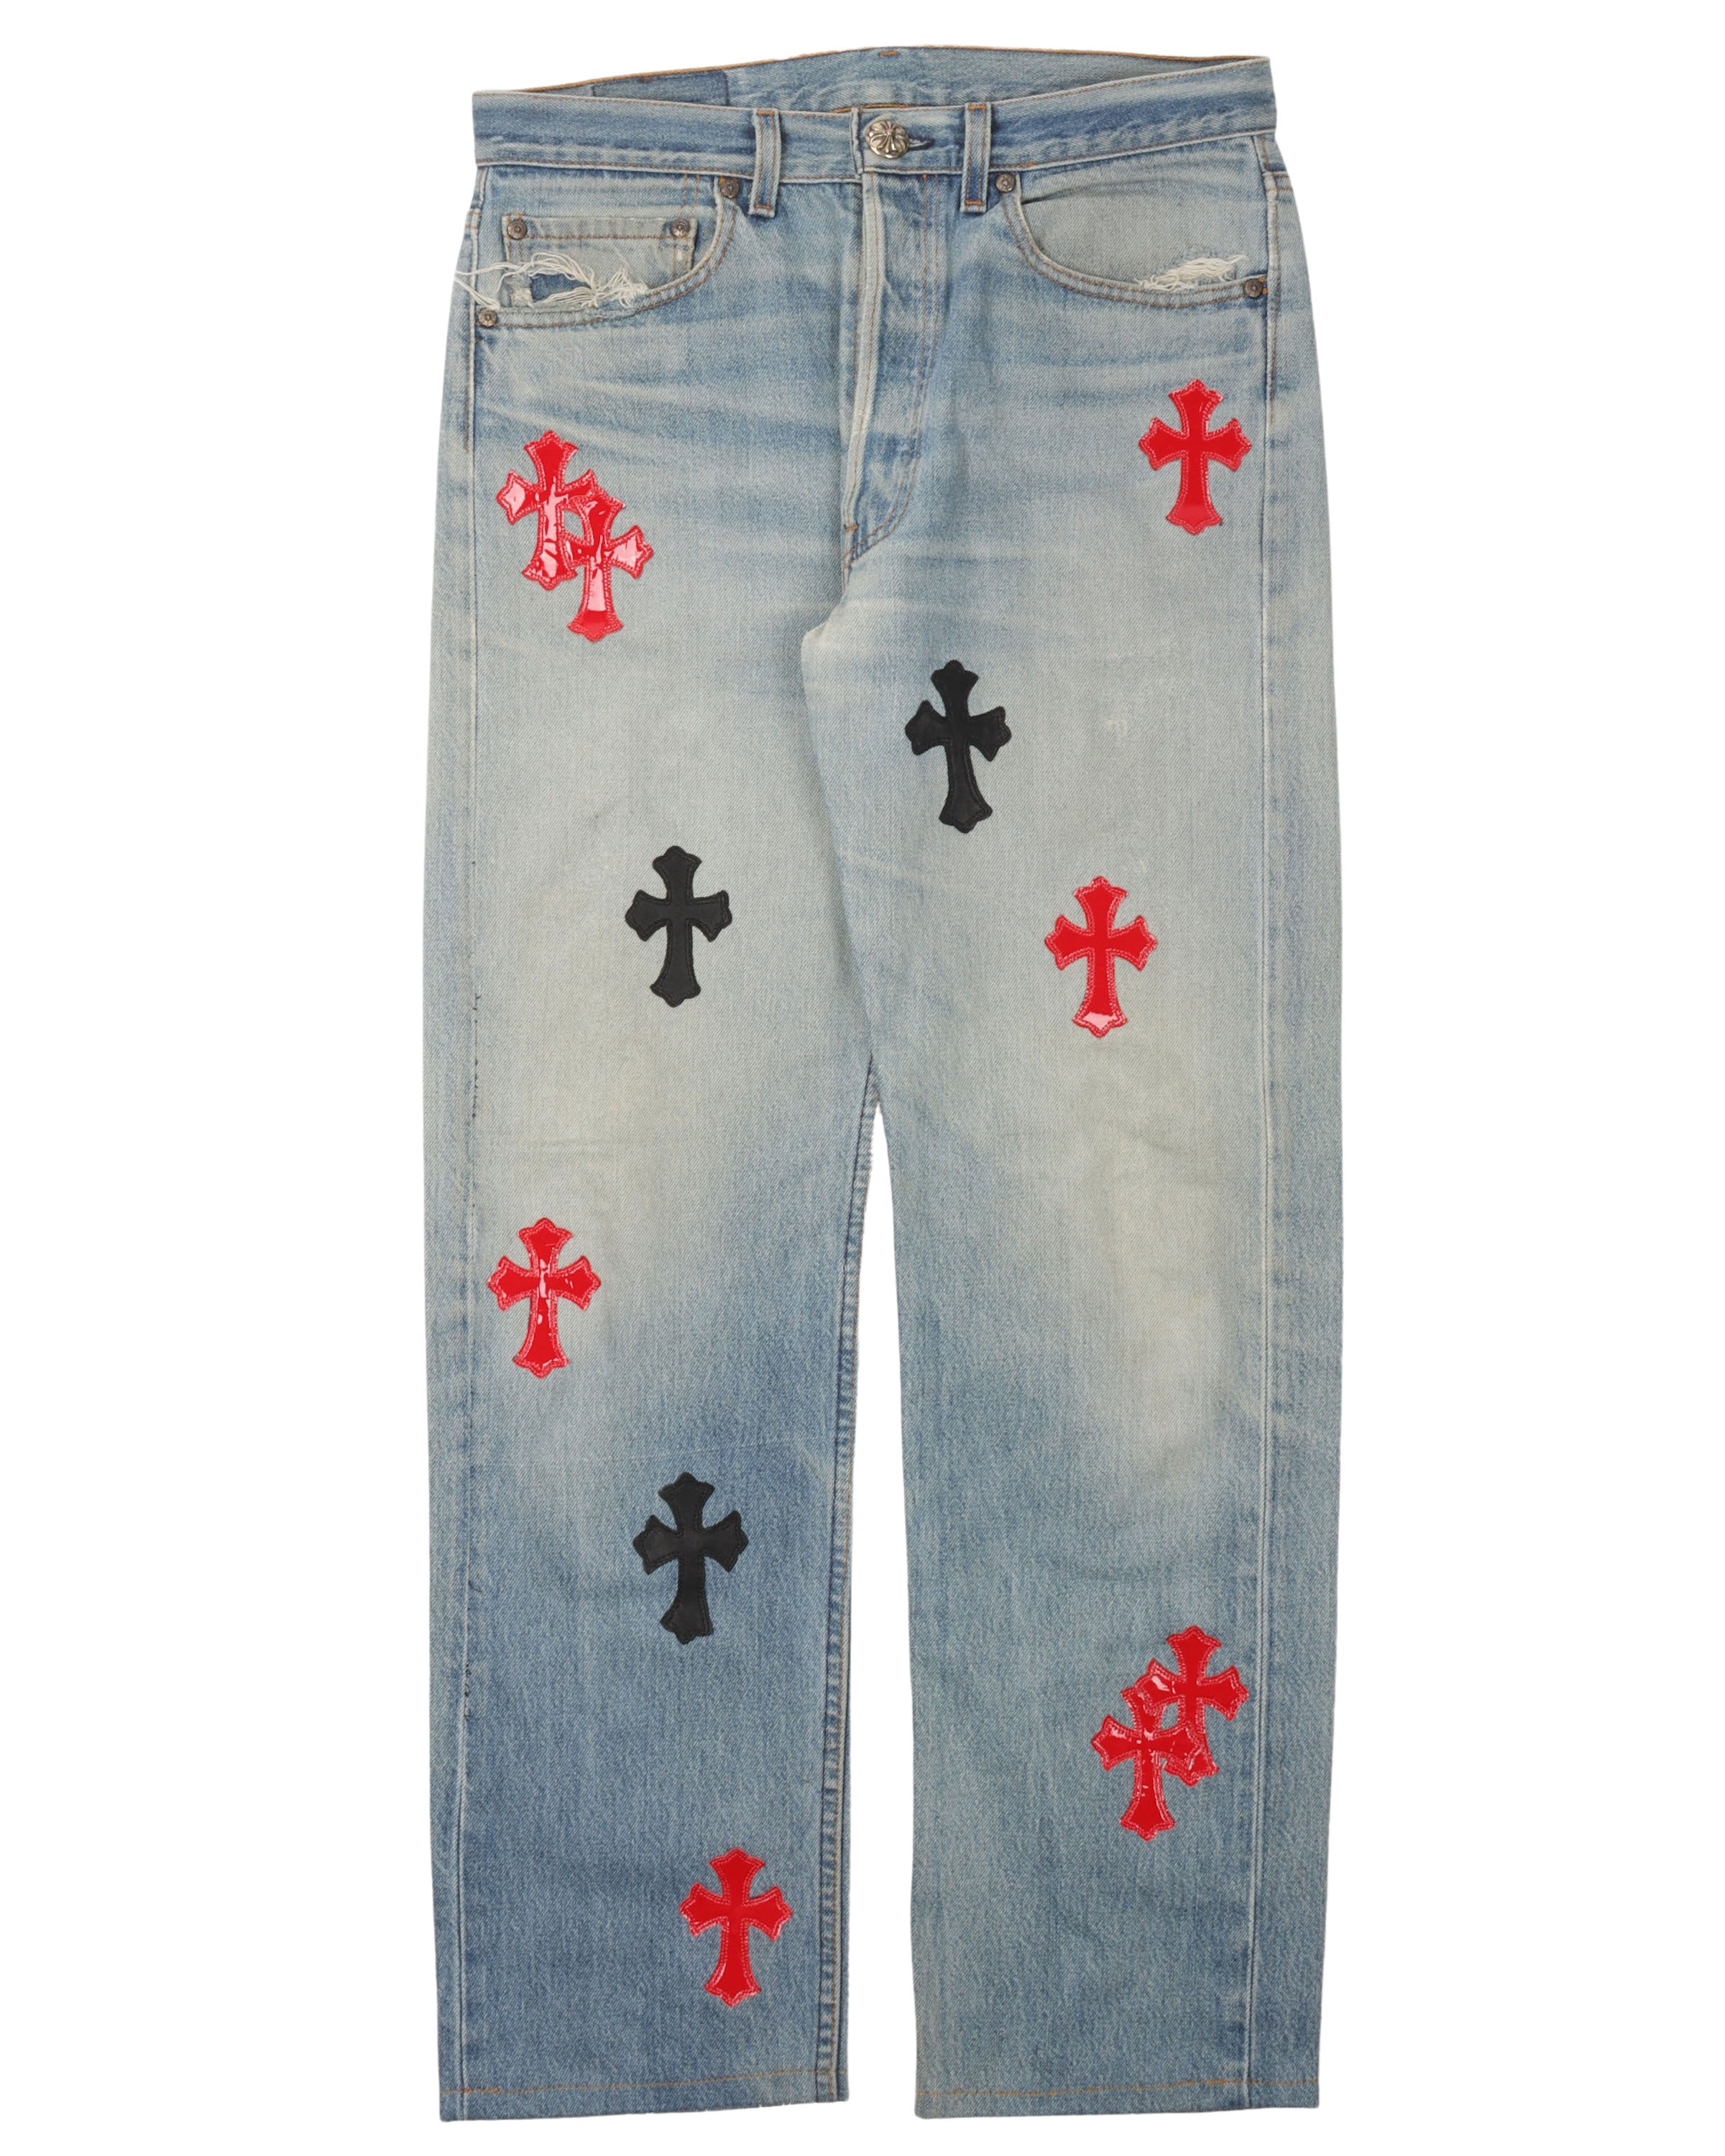 1 of 1 Patent Leather Cross Patch Levi's Jeans